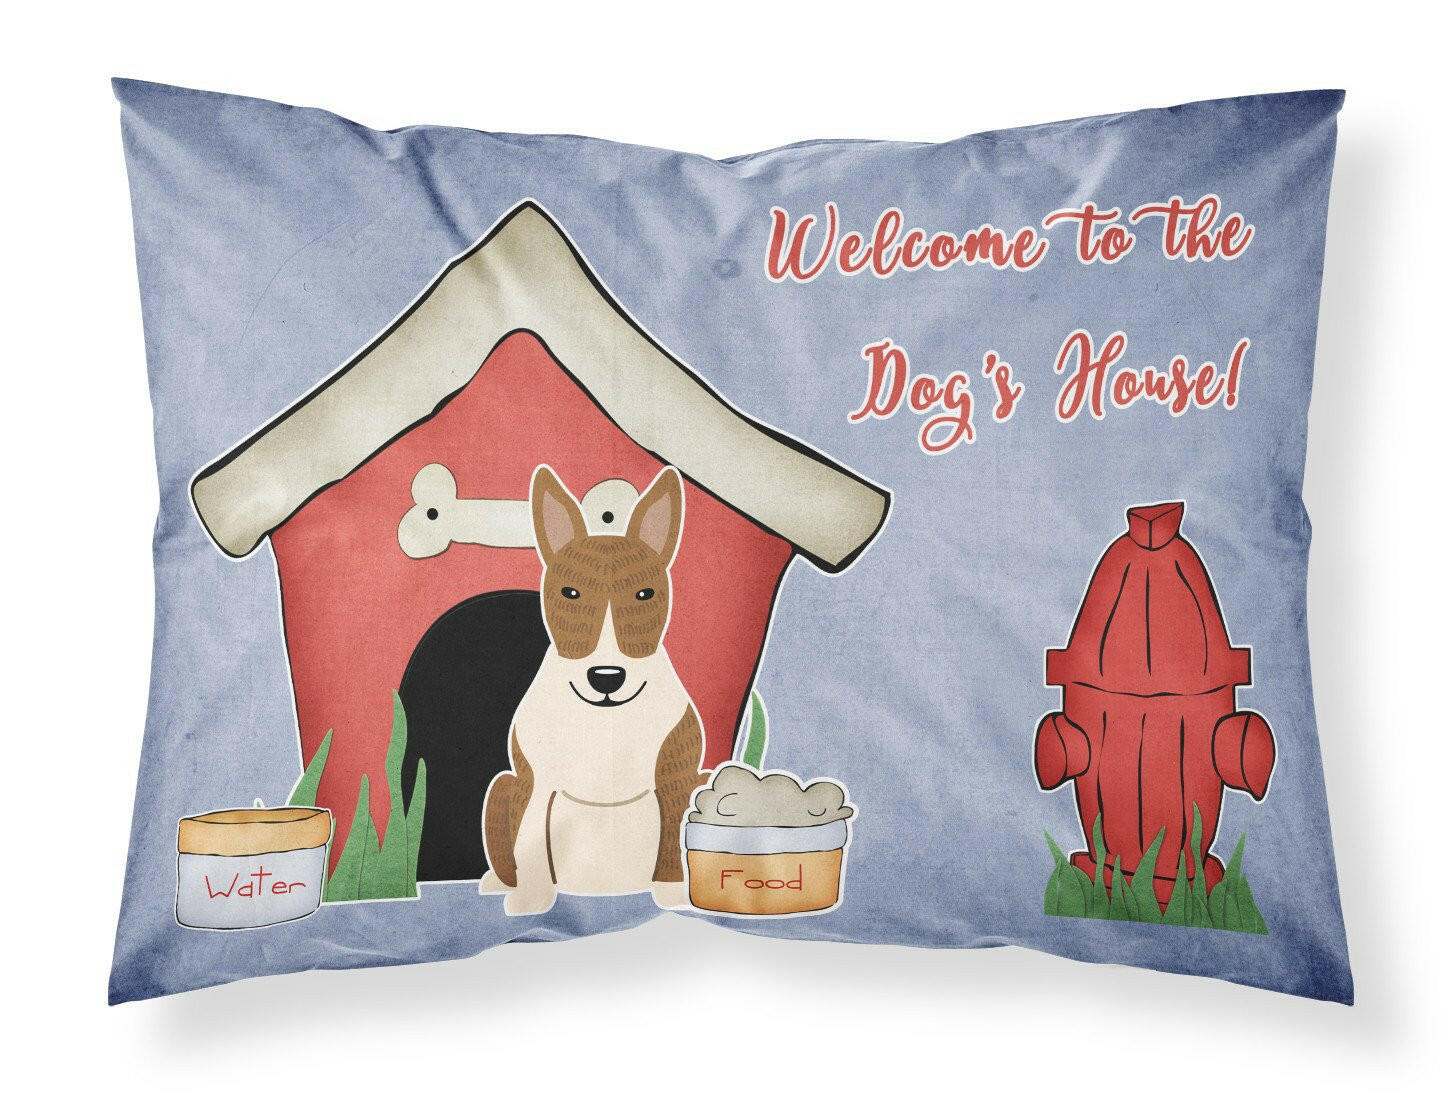 Dog House Collection Bull Terrier Brindle Fabric Standard Pillowcase BB2891PILLOWCASE by Caroline's Treasures